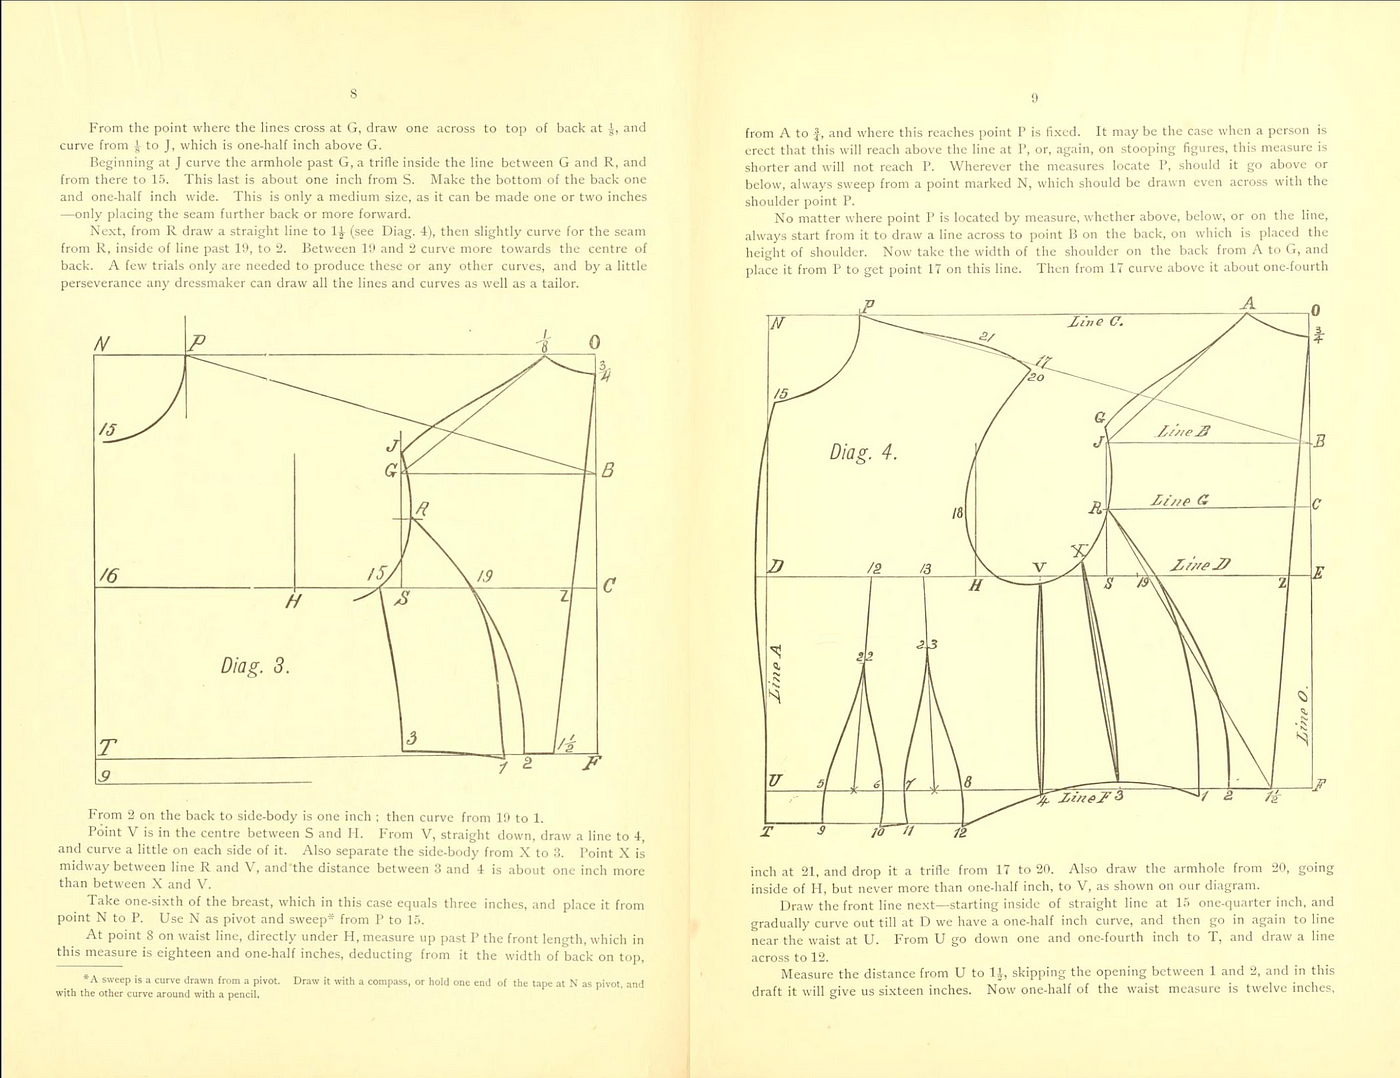 A short history of U.S. white women's measurements used for patternmaking  (analog me)